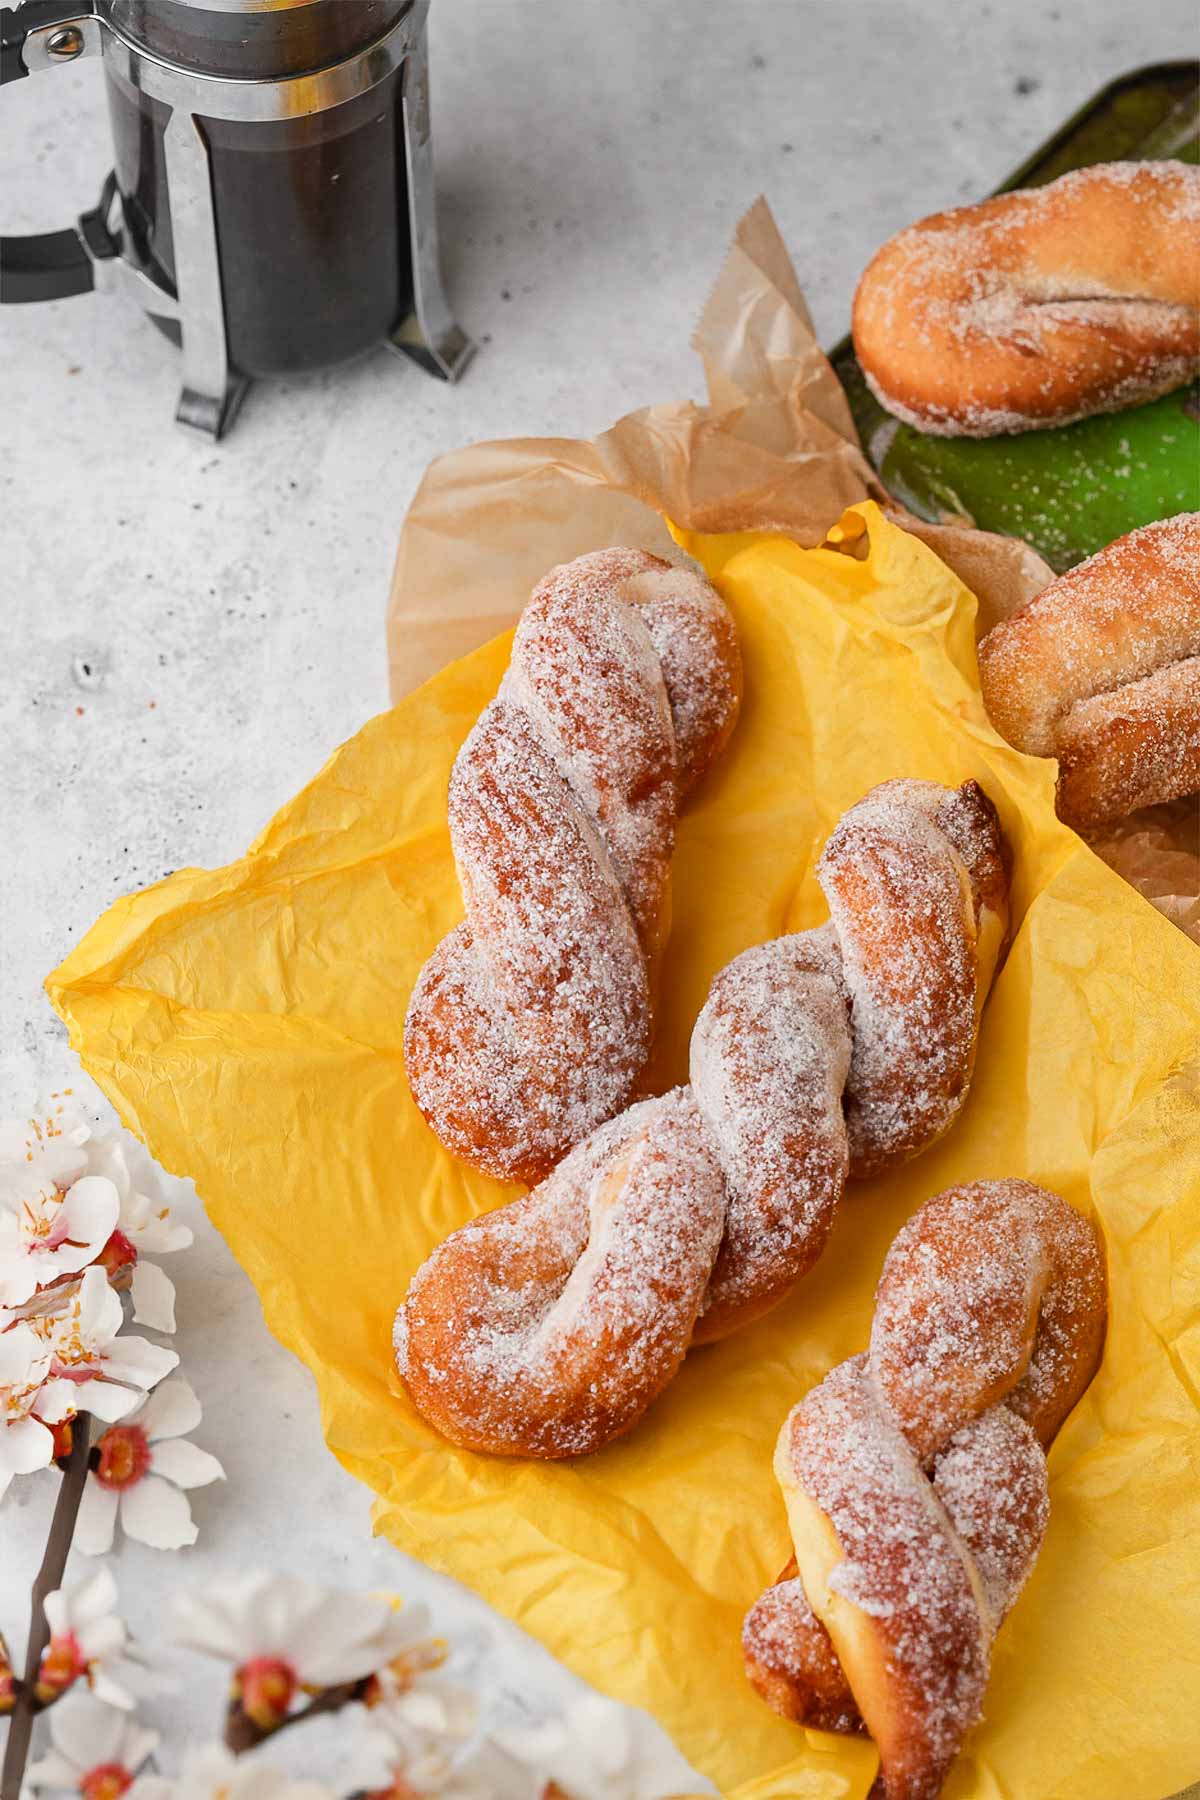 Sugared Korean twisted donuts with cherry blossoms on a yellow background.